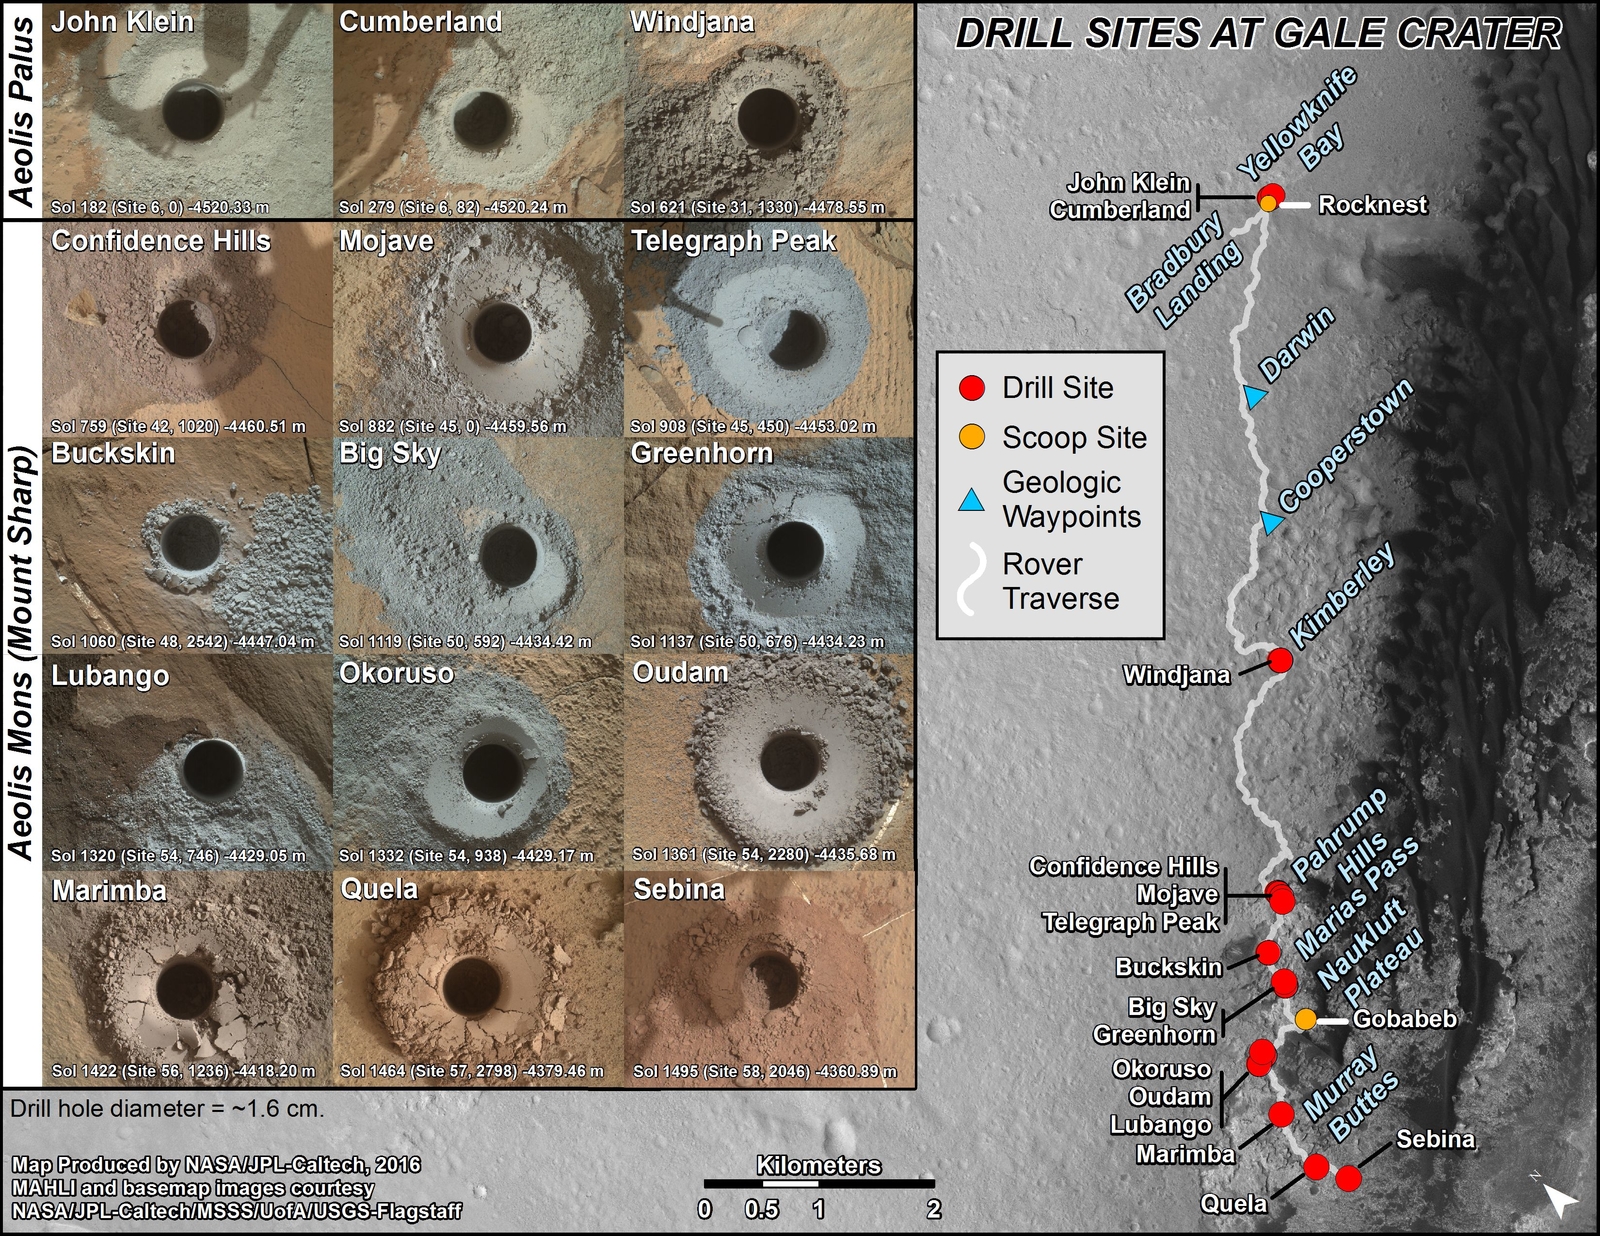 This graphic maps locations of the sites where NASA's Curiosity Mars rover collected its first 19 rock or soil samples for laboratory analysis inside the vehicle. It also presents images of the drilled holes where 15 rock-powder samples were acquired, most recently at "Sebina," on Oct. 20, 2016.